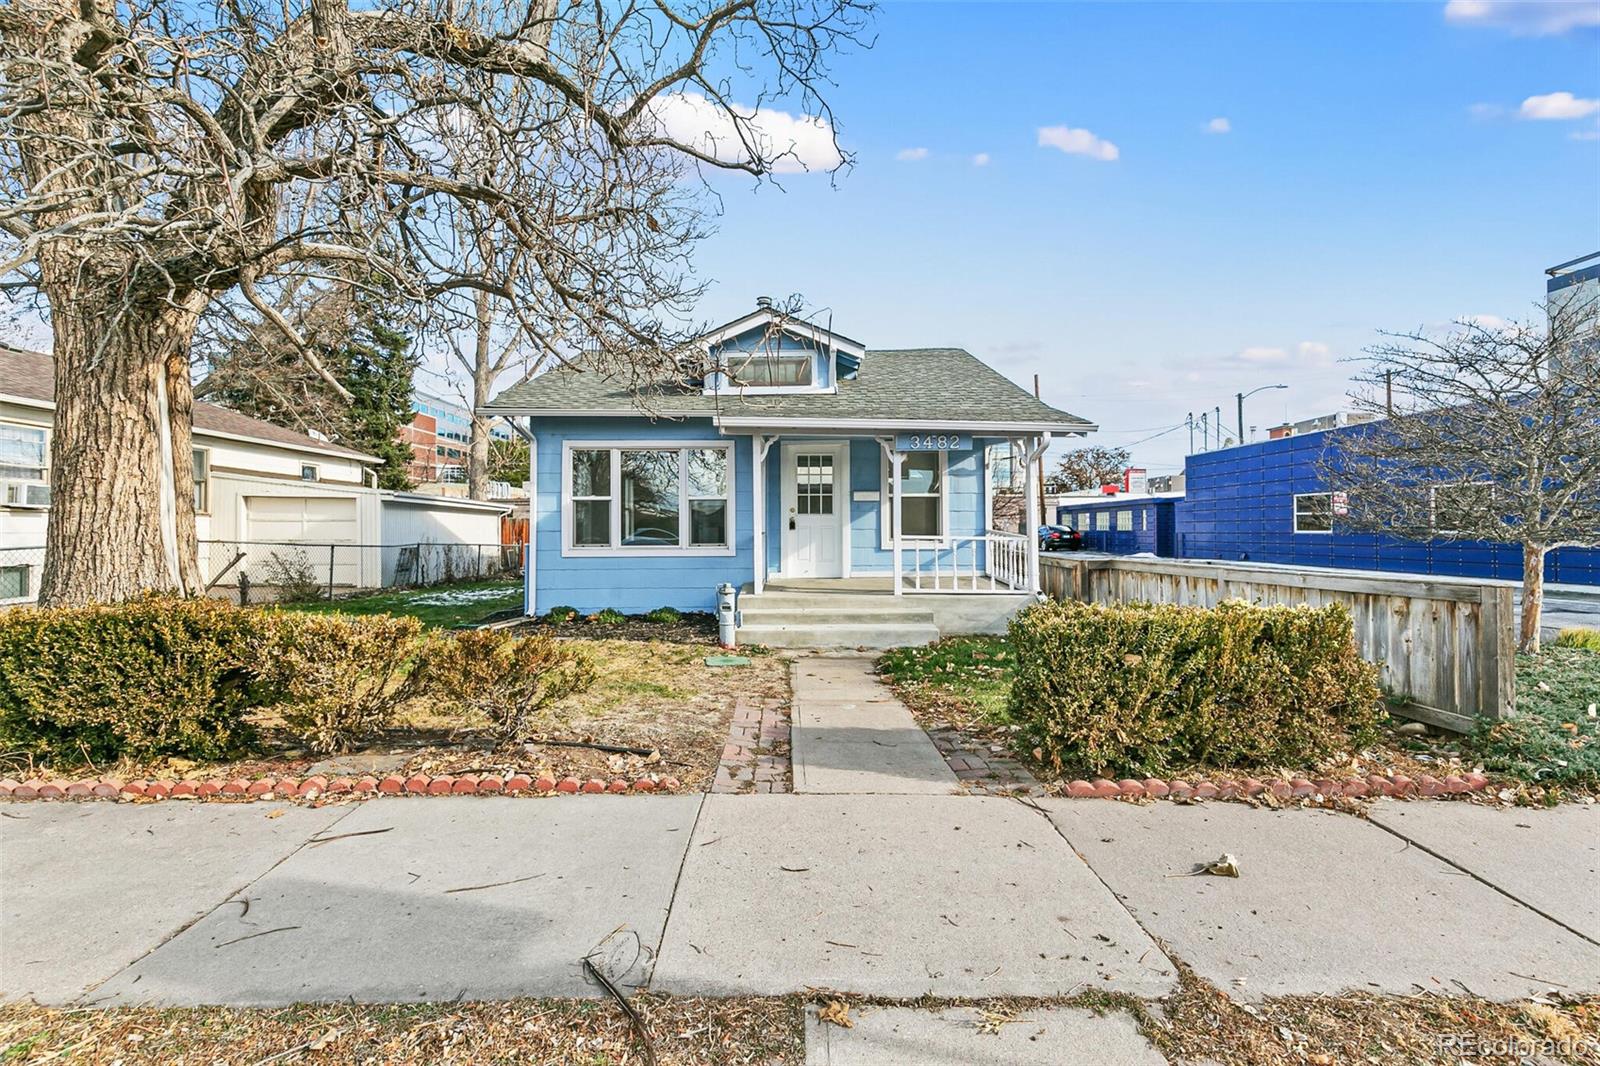 Report Image for 3482 S Grant Street,Englewood, Colorado